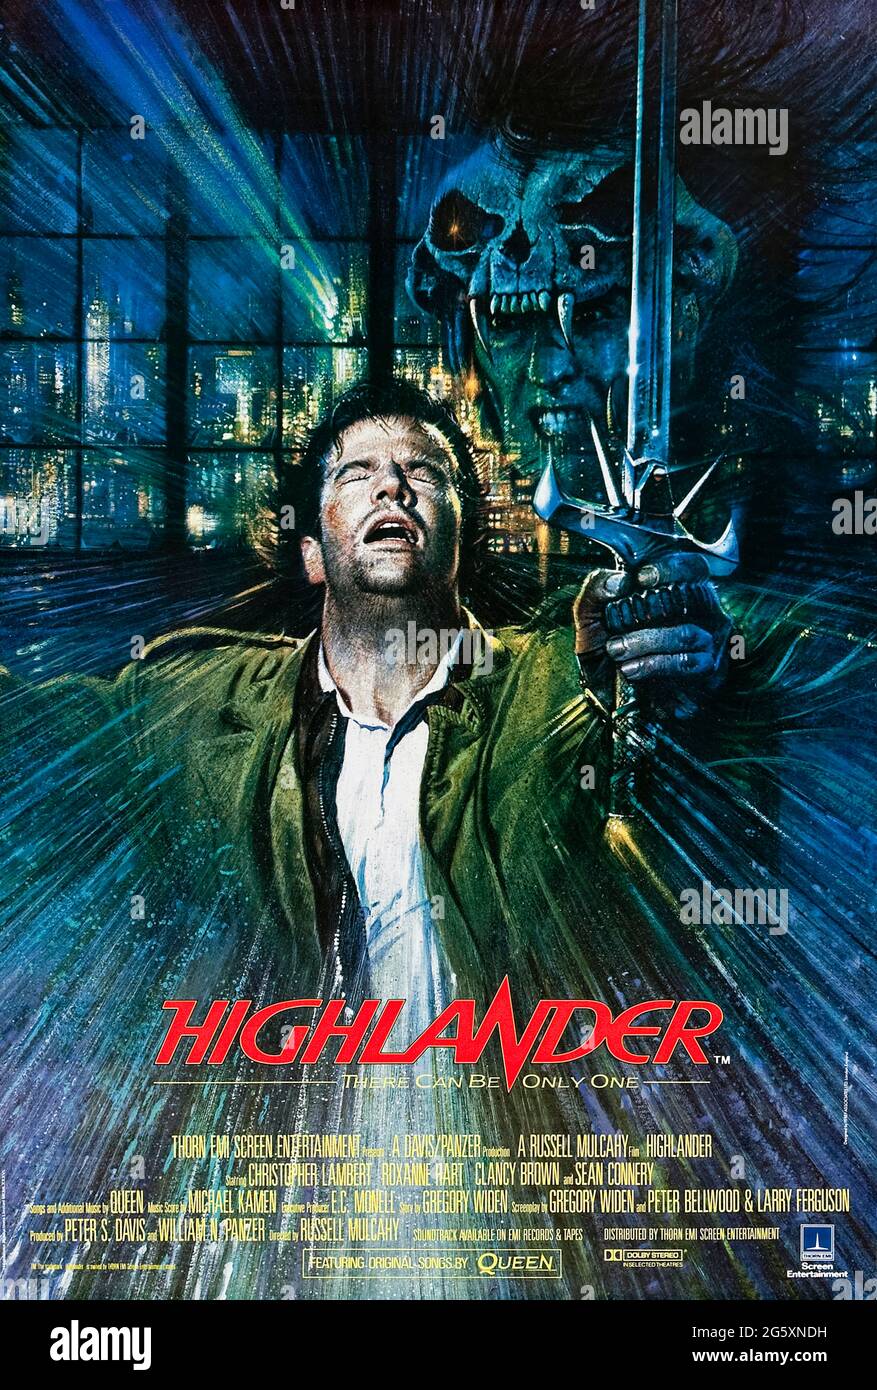 - hi-res and images Highlander photography stock Alamy poster film